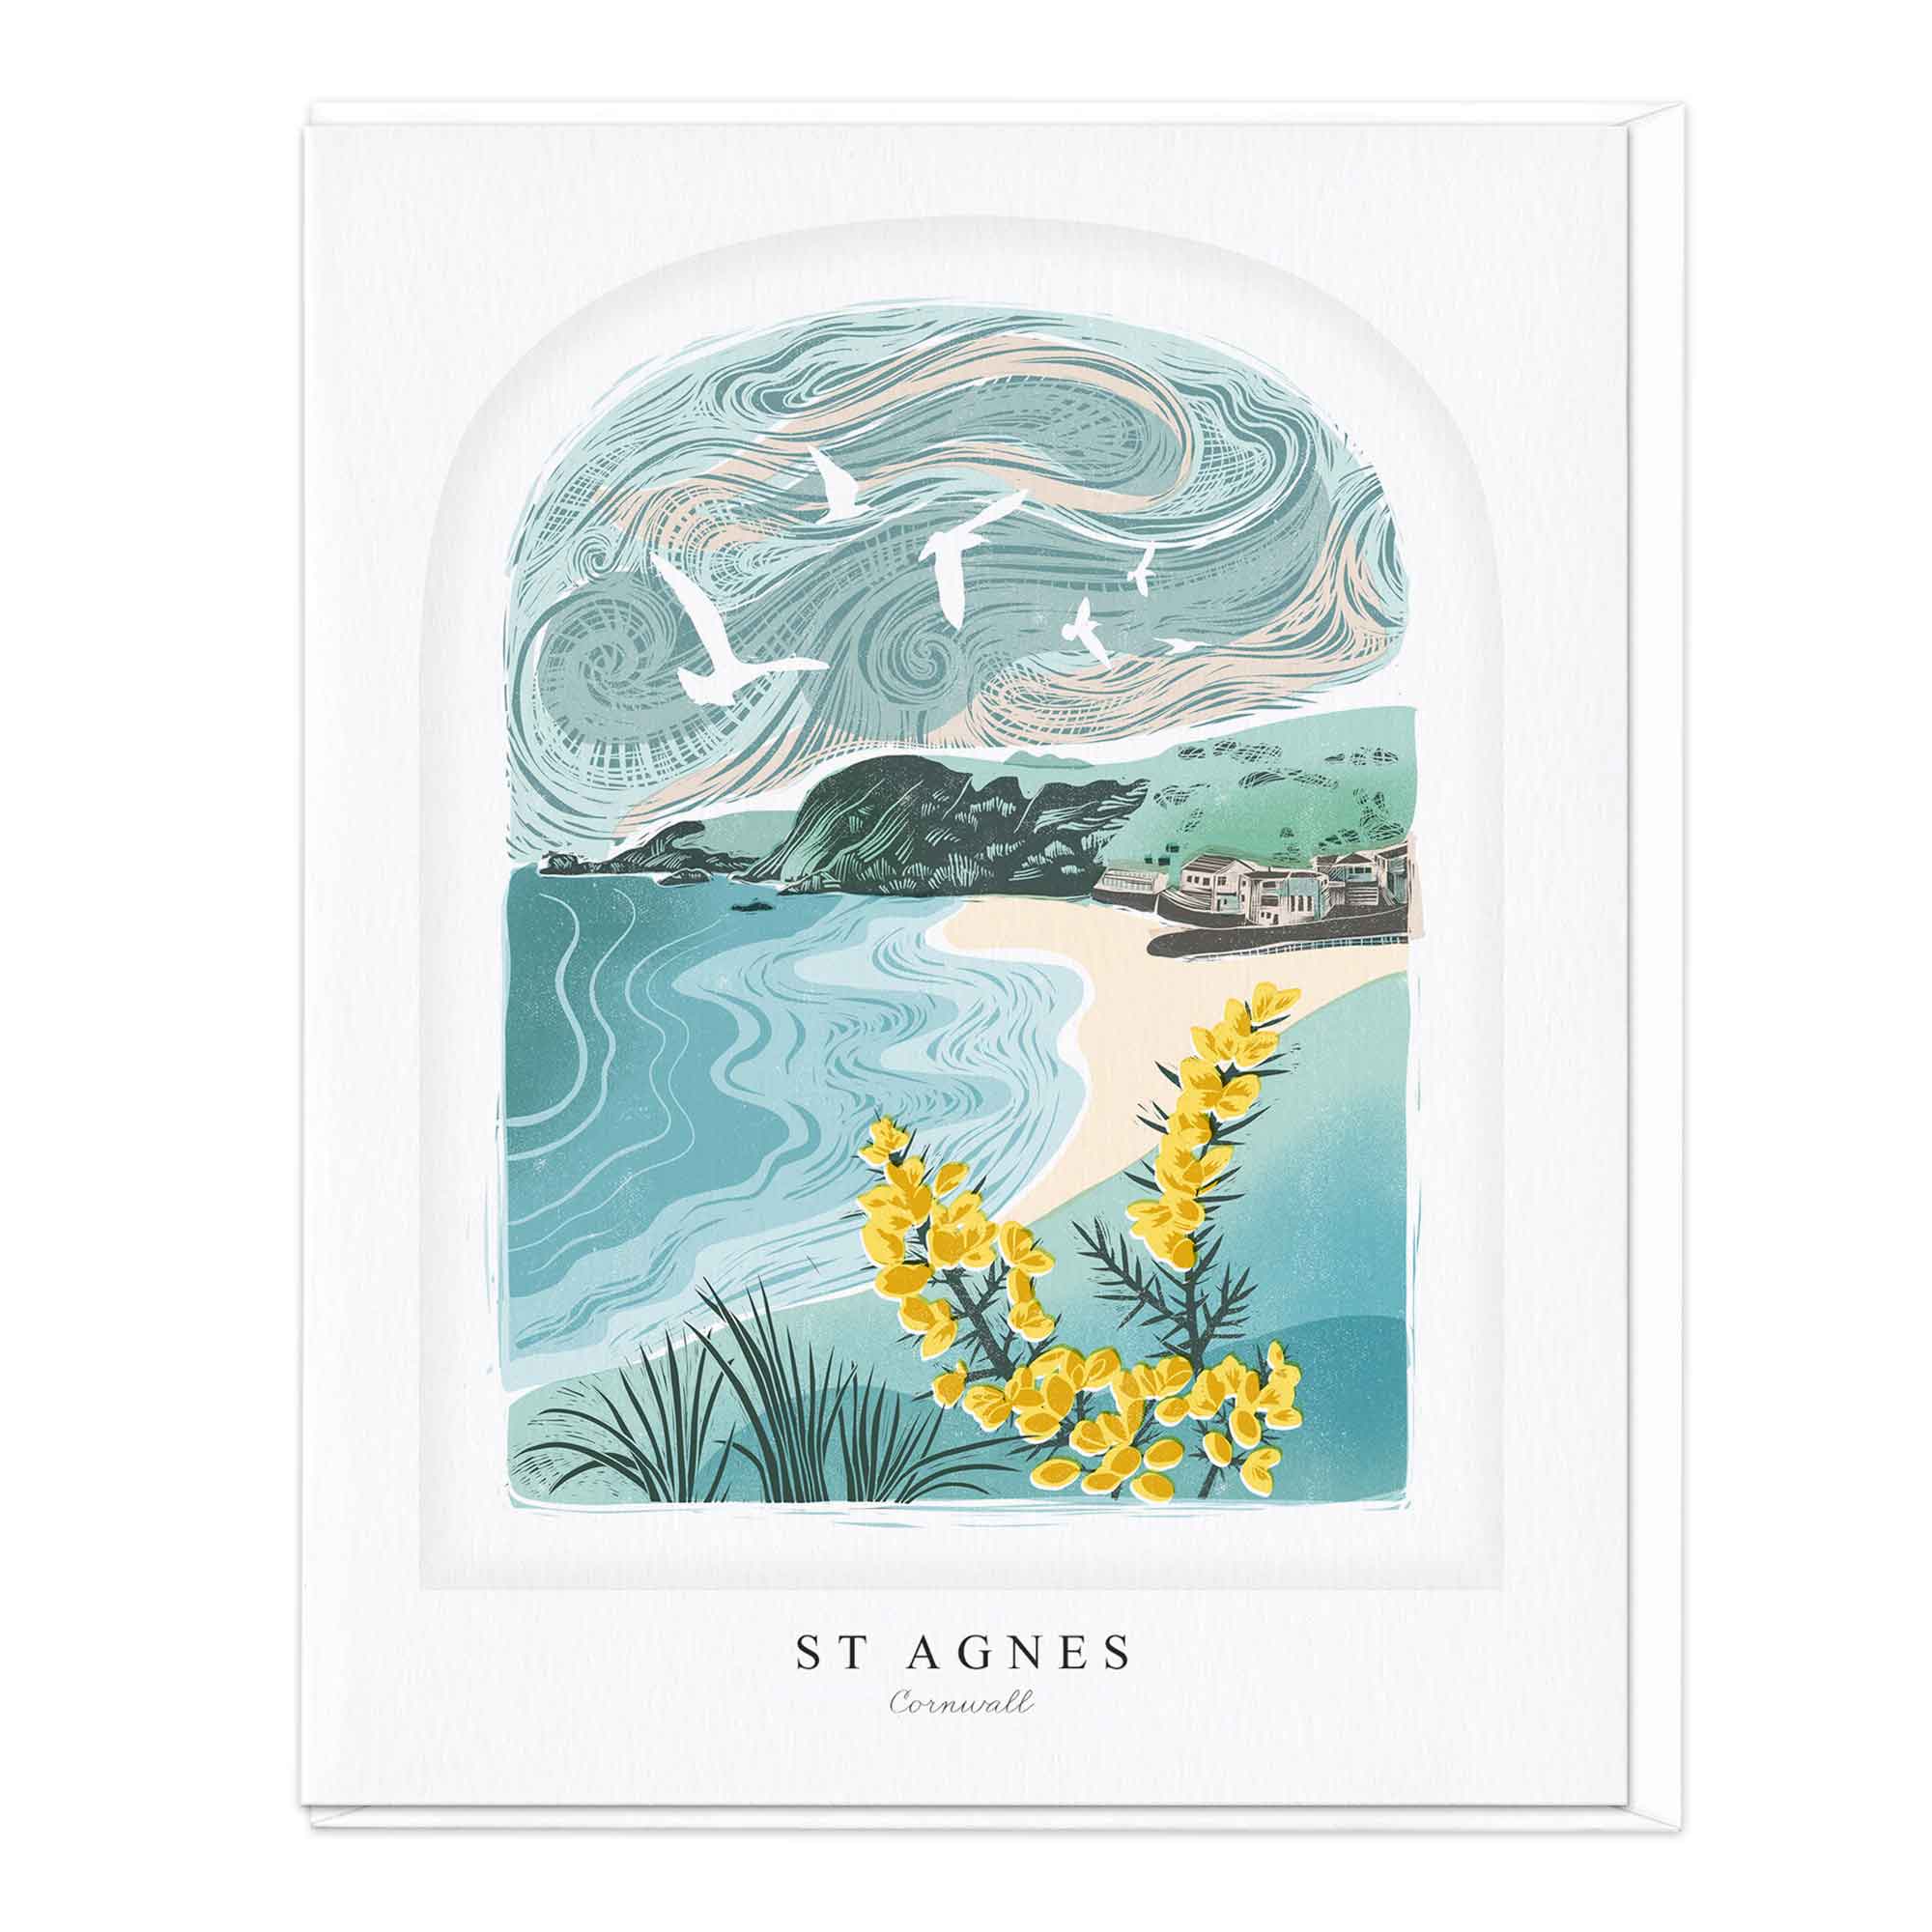 St Agnes Arched Lino Luxury Card